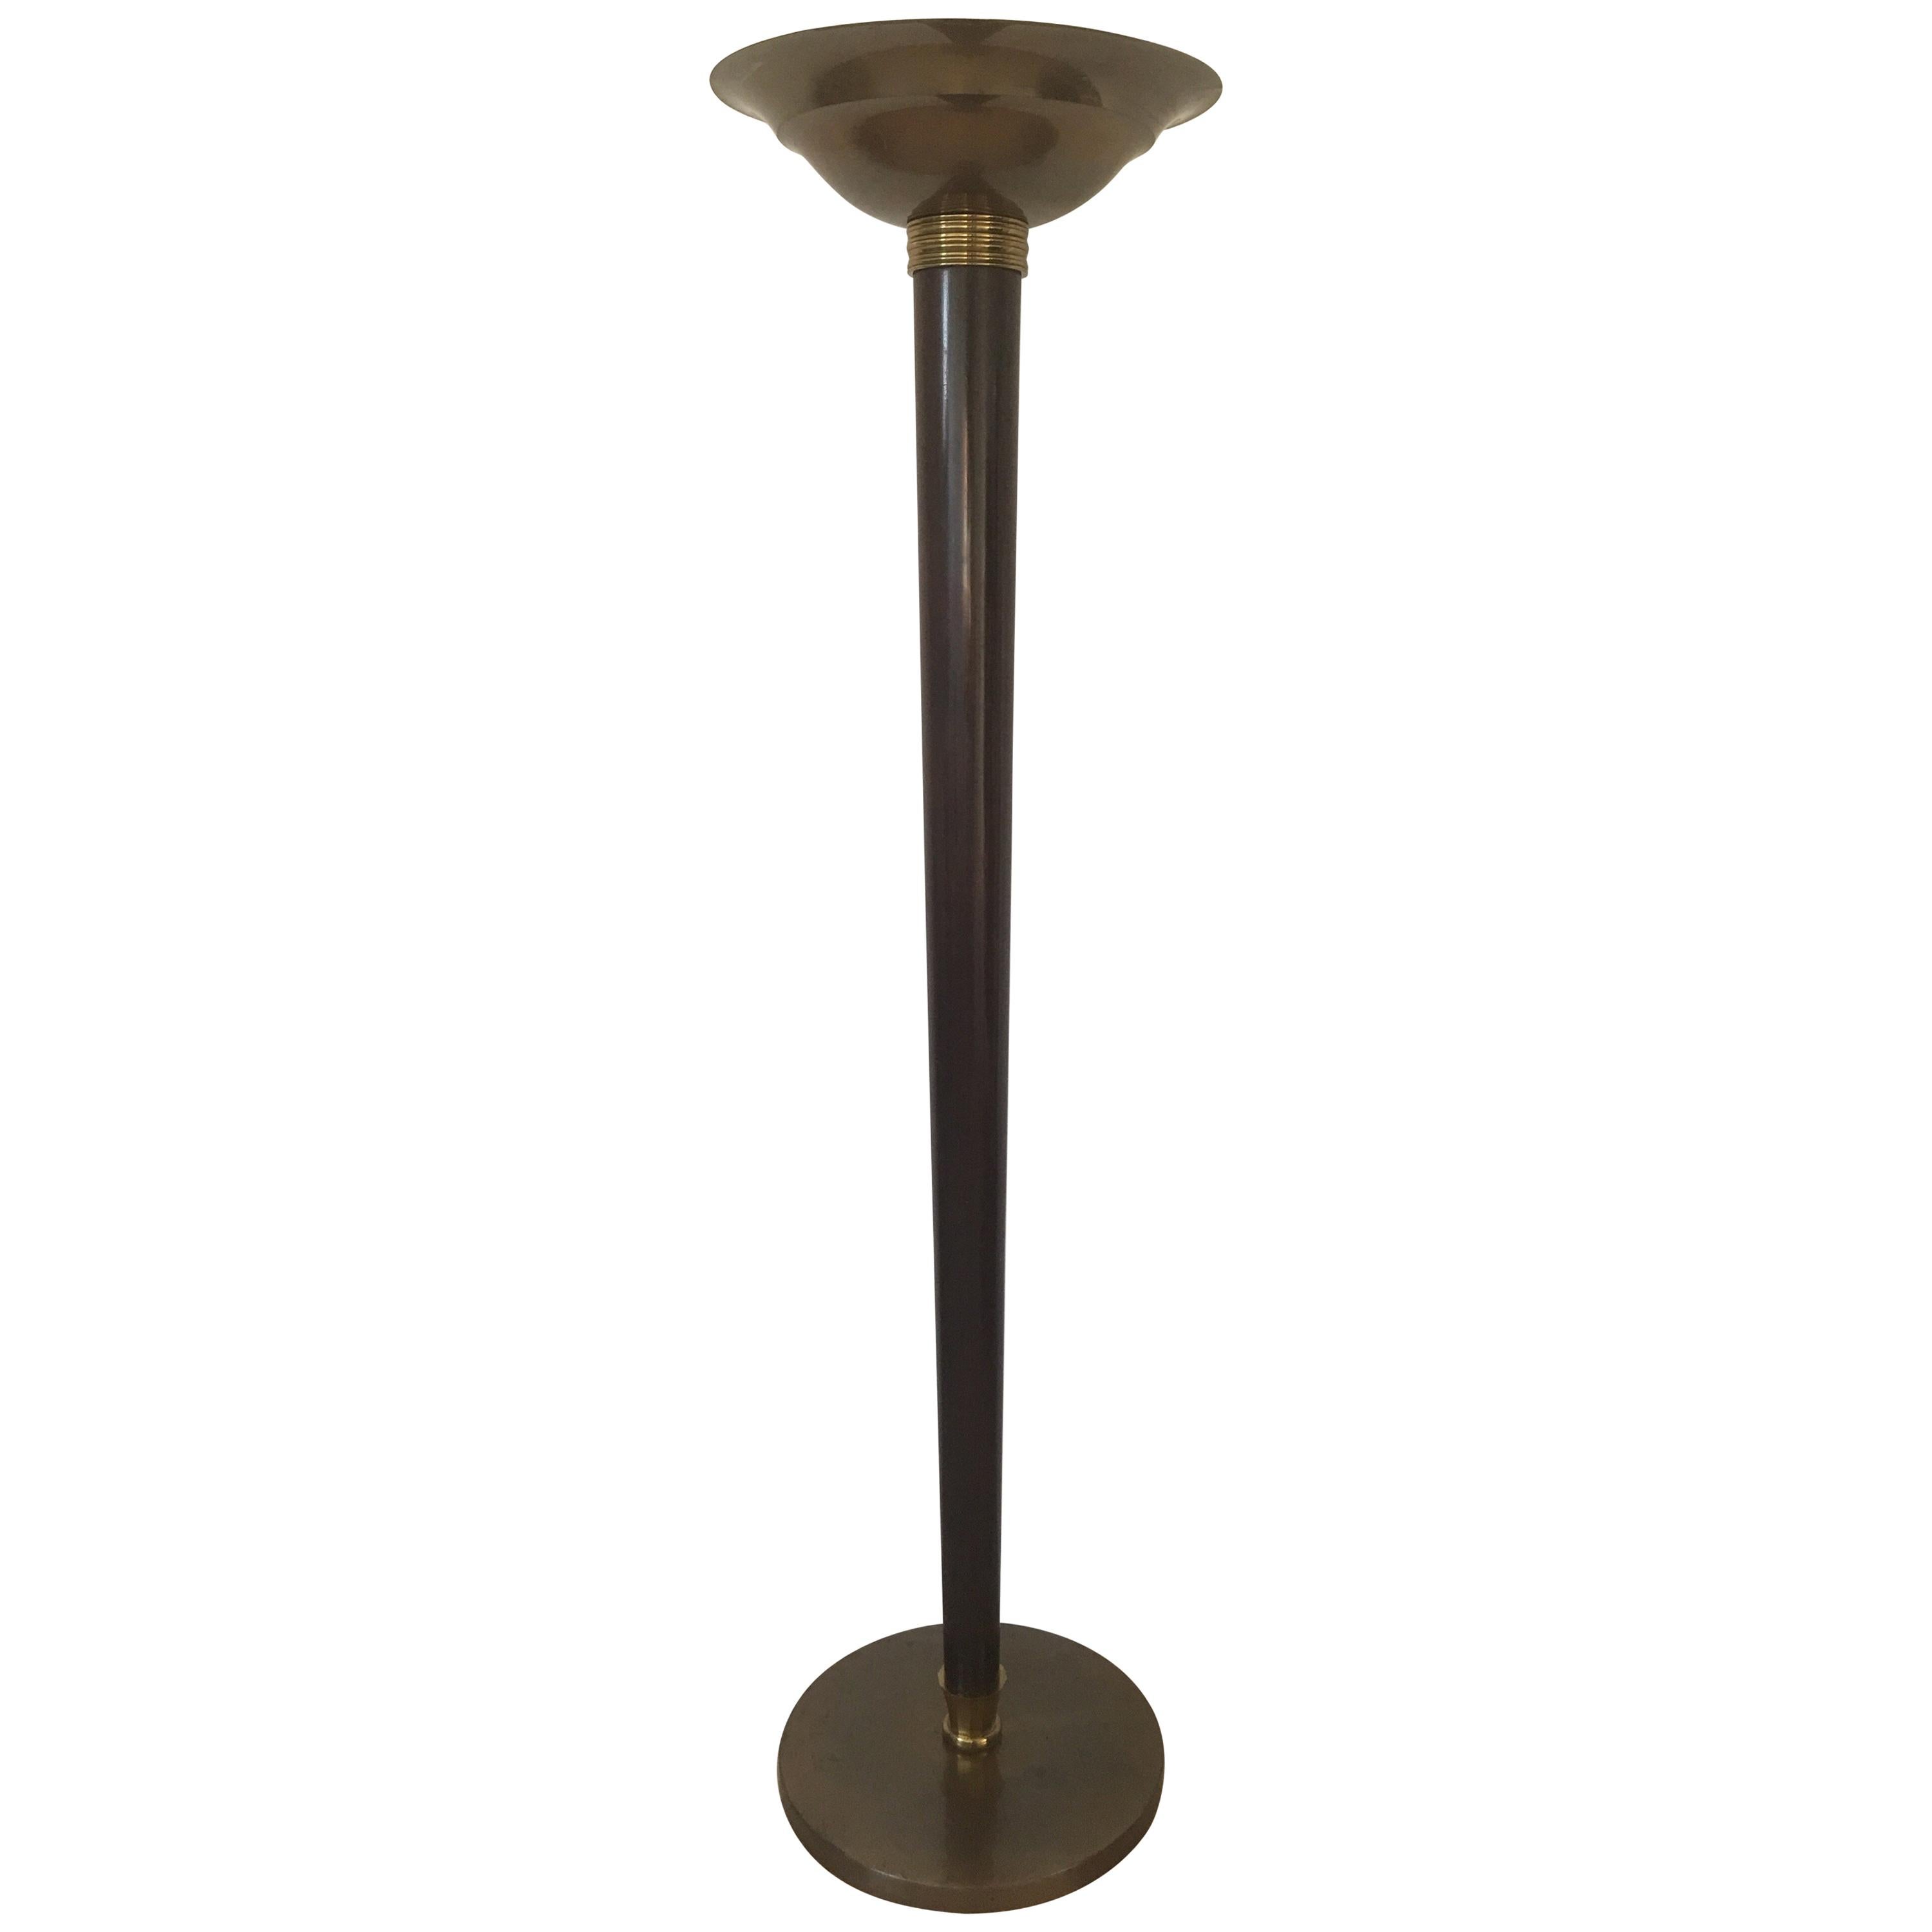 Genet et Michon Art Deco Floor Lamp in Wood and Brass, French, 1930s For Sale